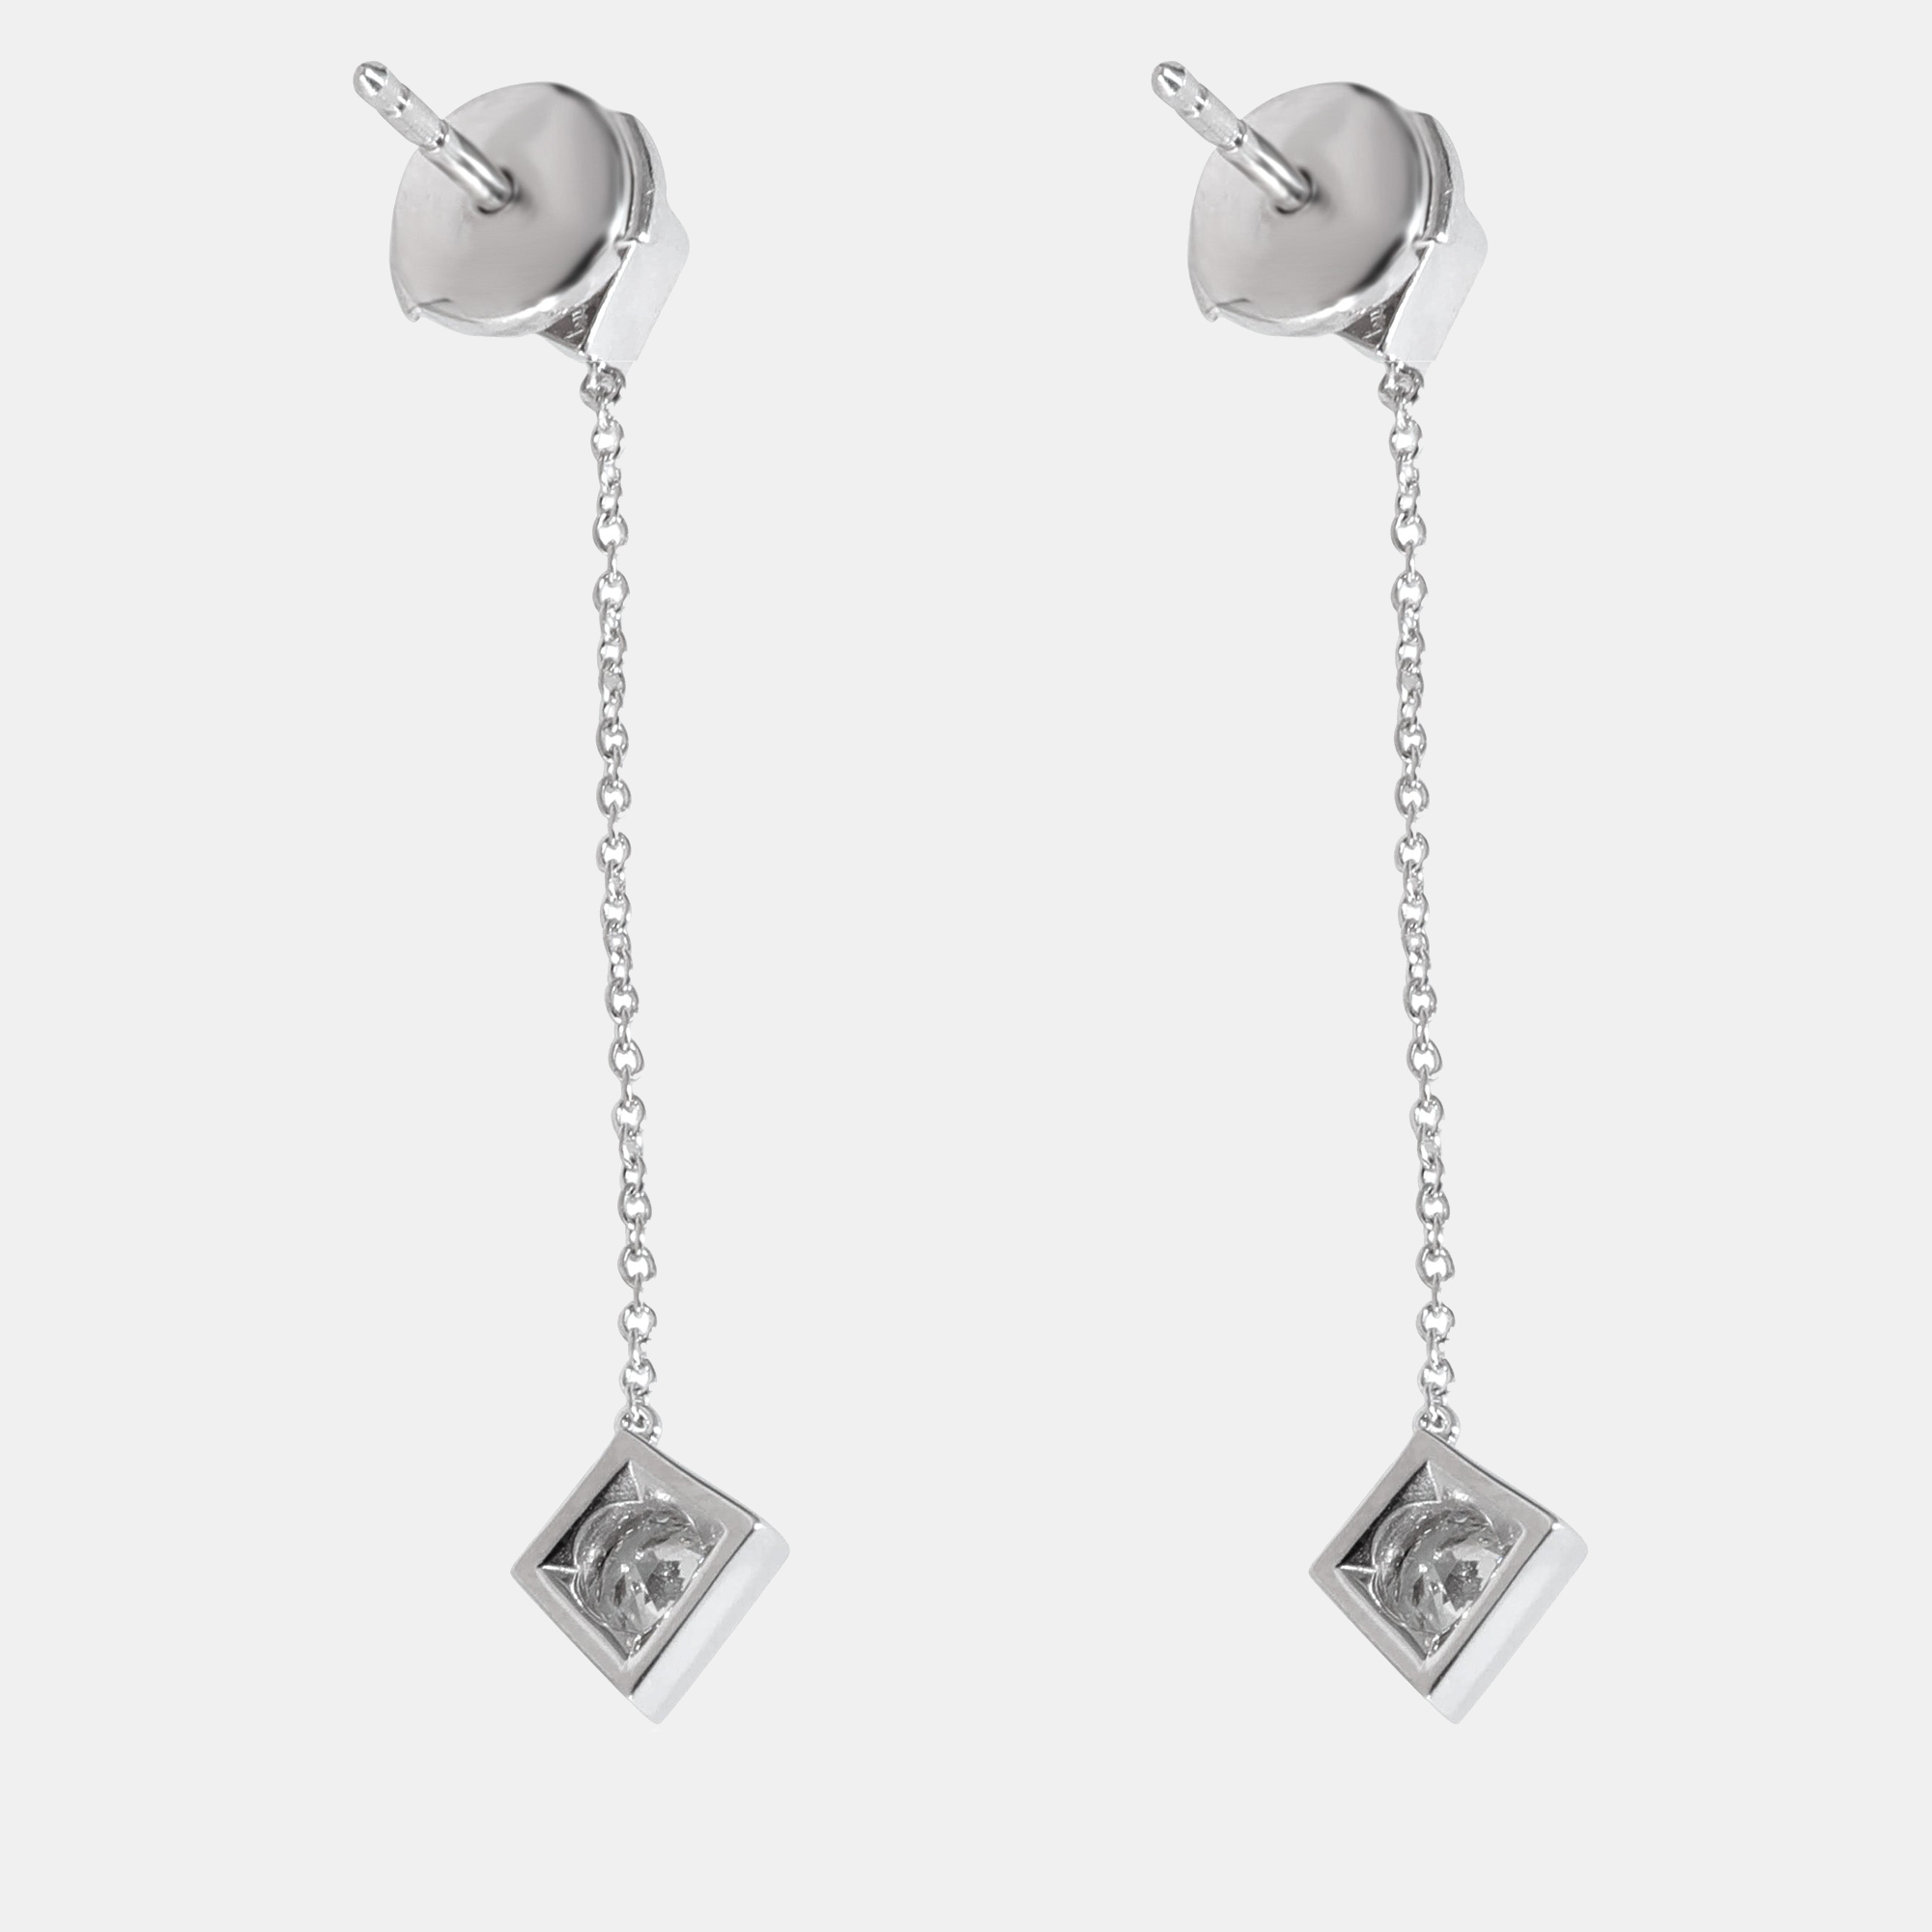 Tiffany & Co. Frank Gehry Torque Cube Drop Earring In 18k White Gold 0.40 CTW